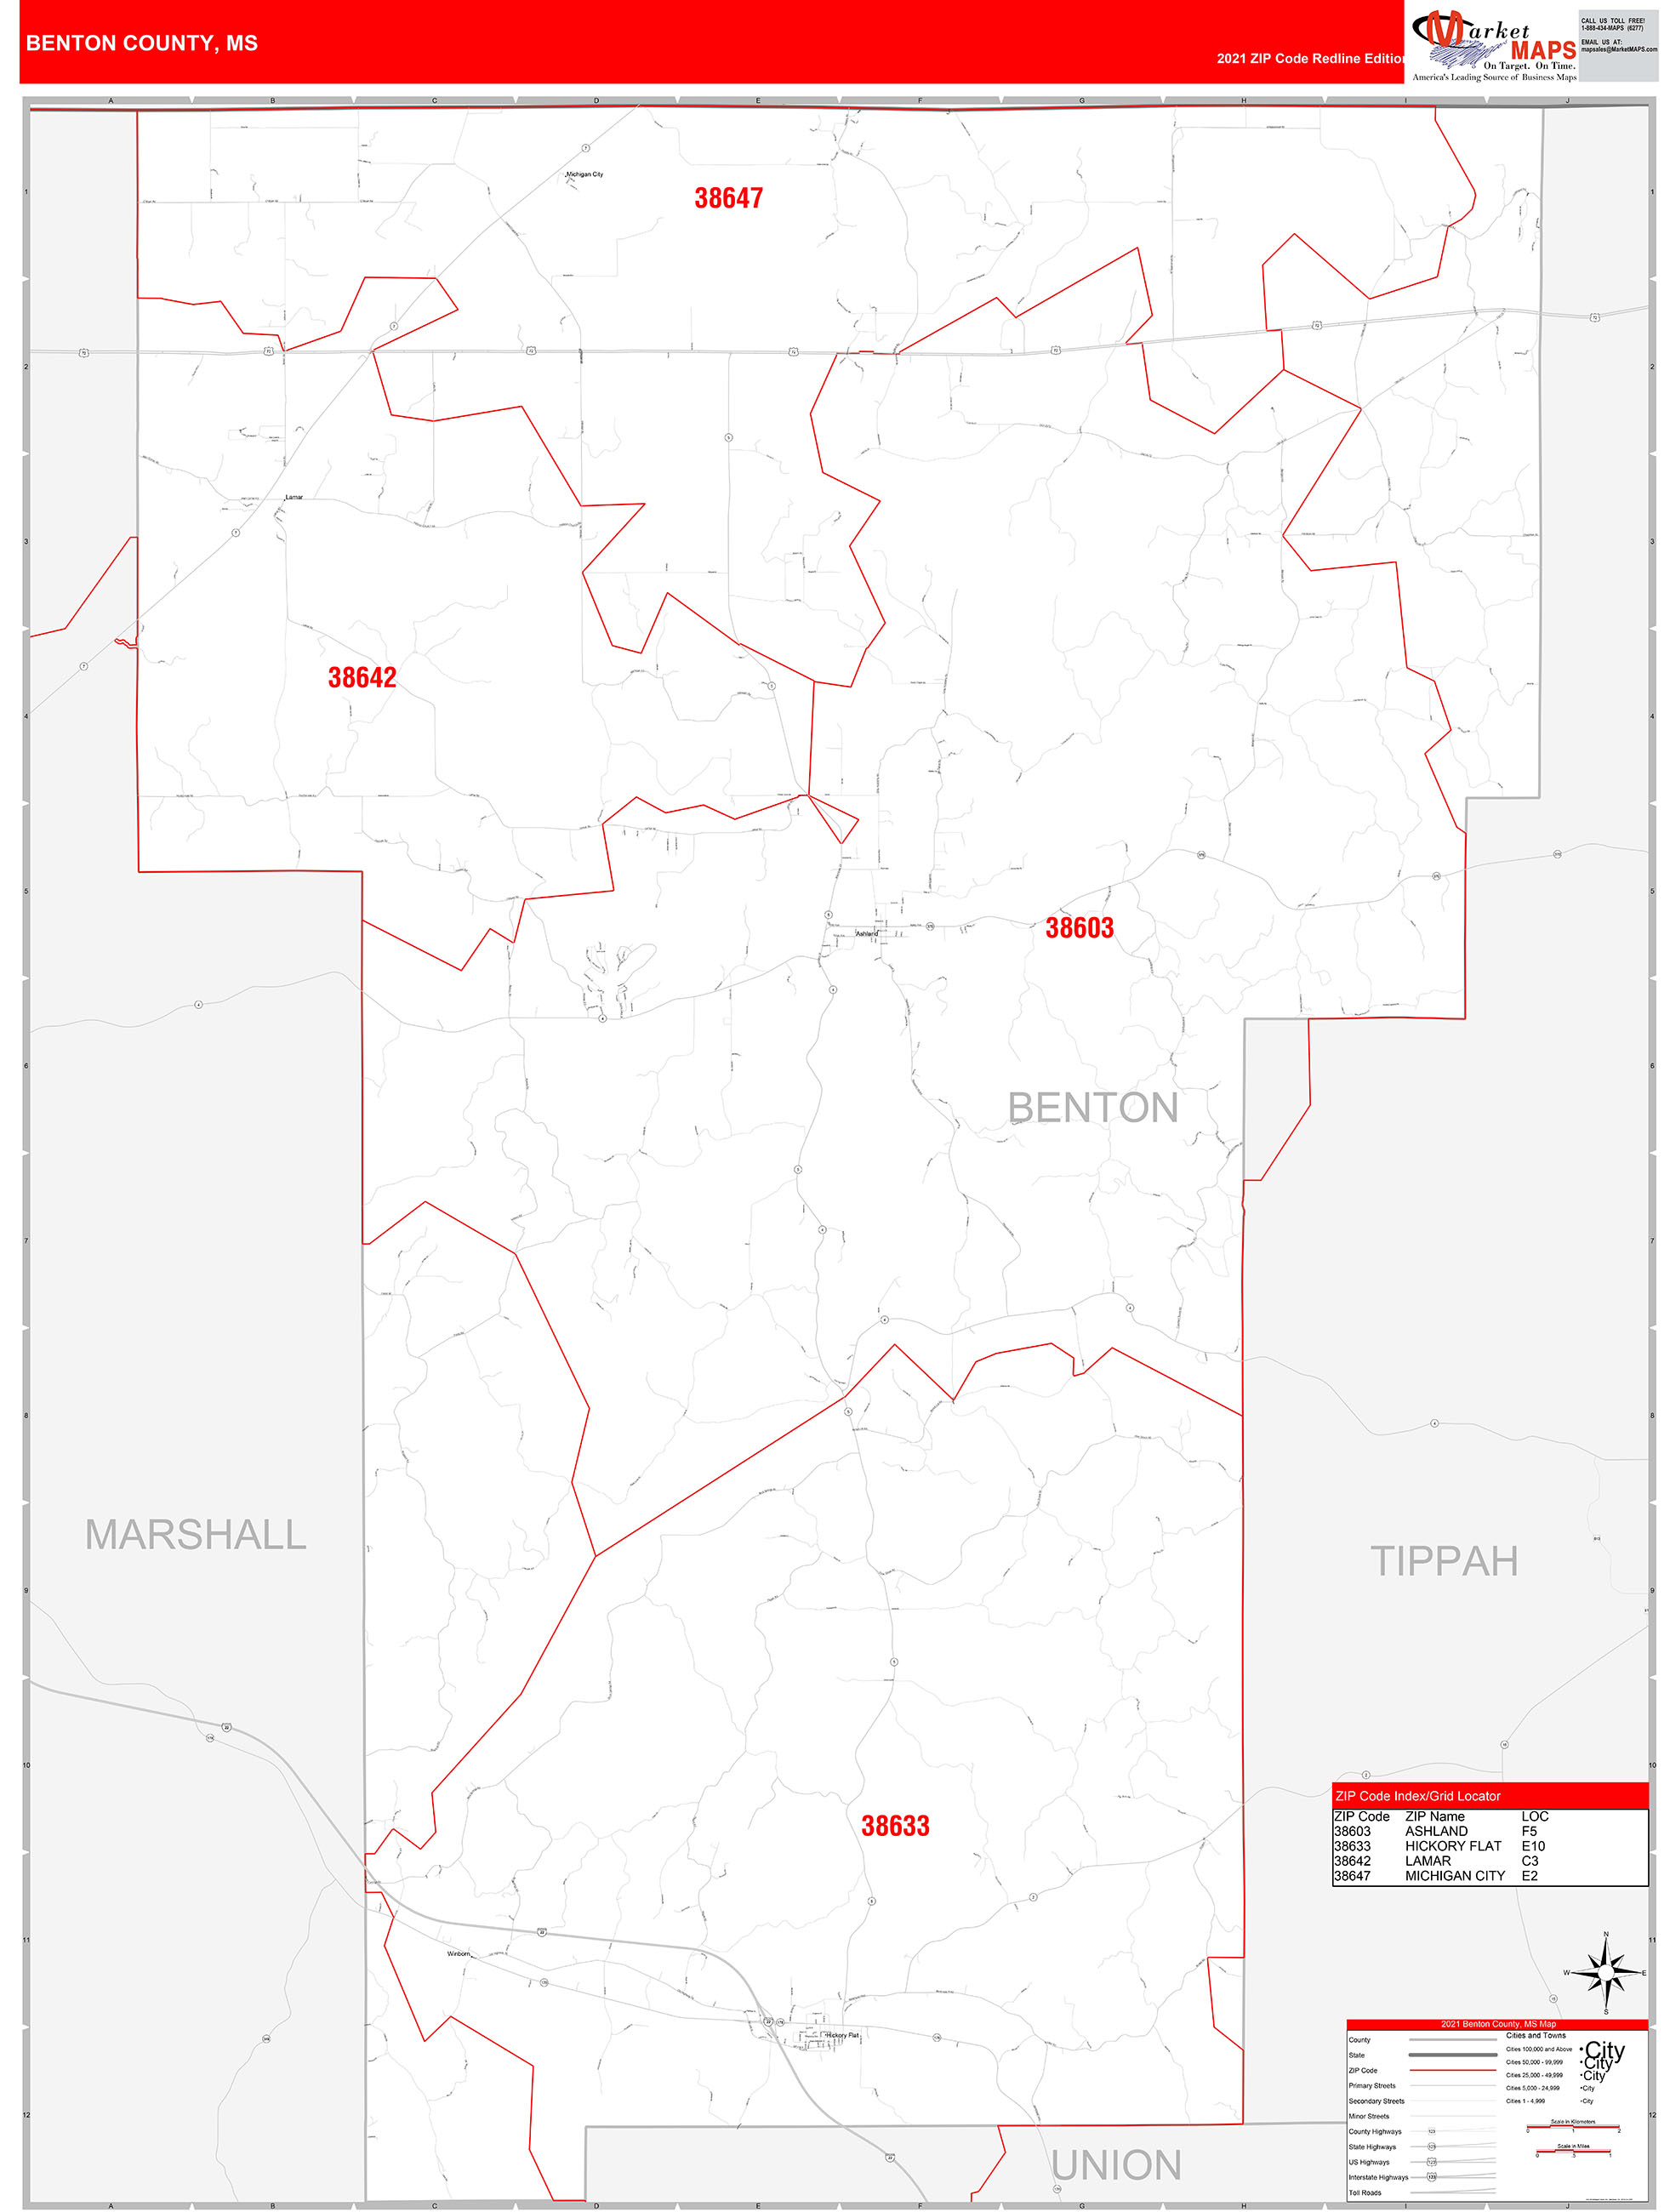 Benton County, MS Zip Code Wall Map Red Line Style by MarketMAPS